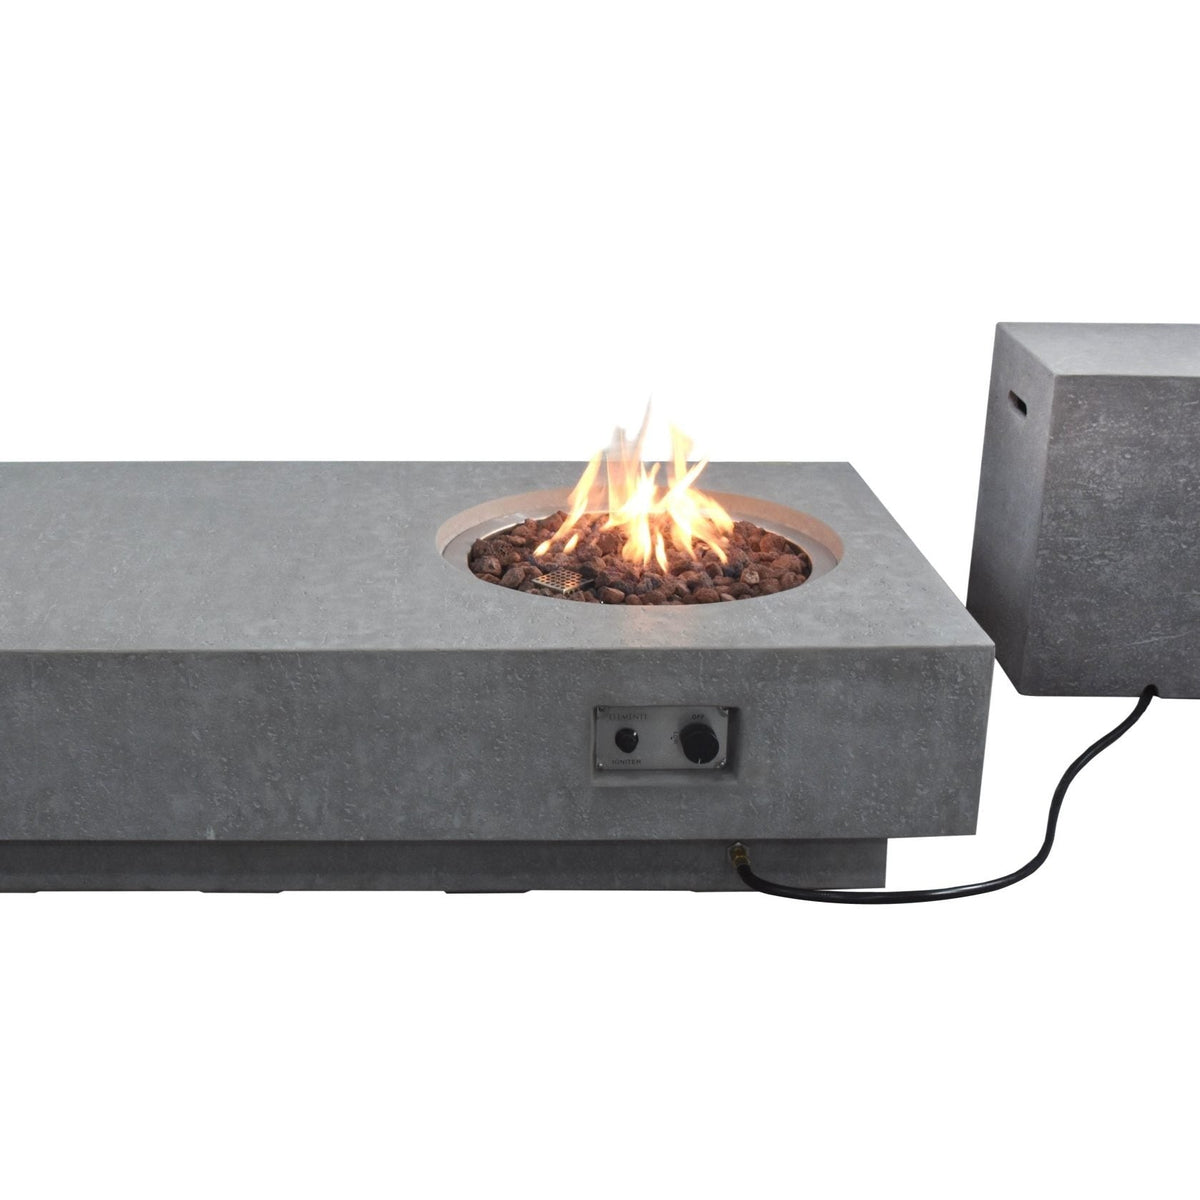 Elementi Metropolis Fire Pit Table in Light Gray with tank cover